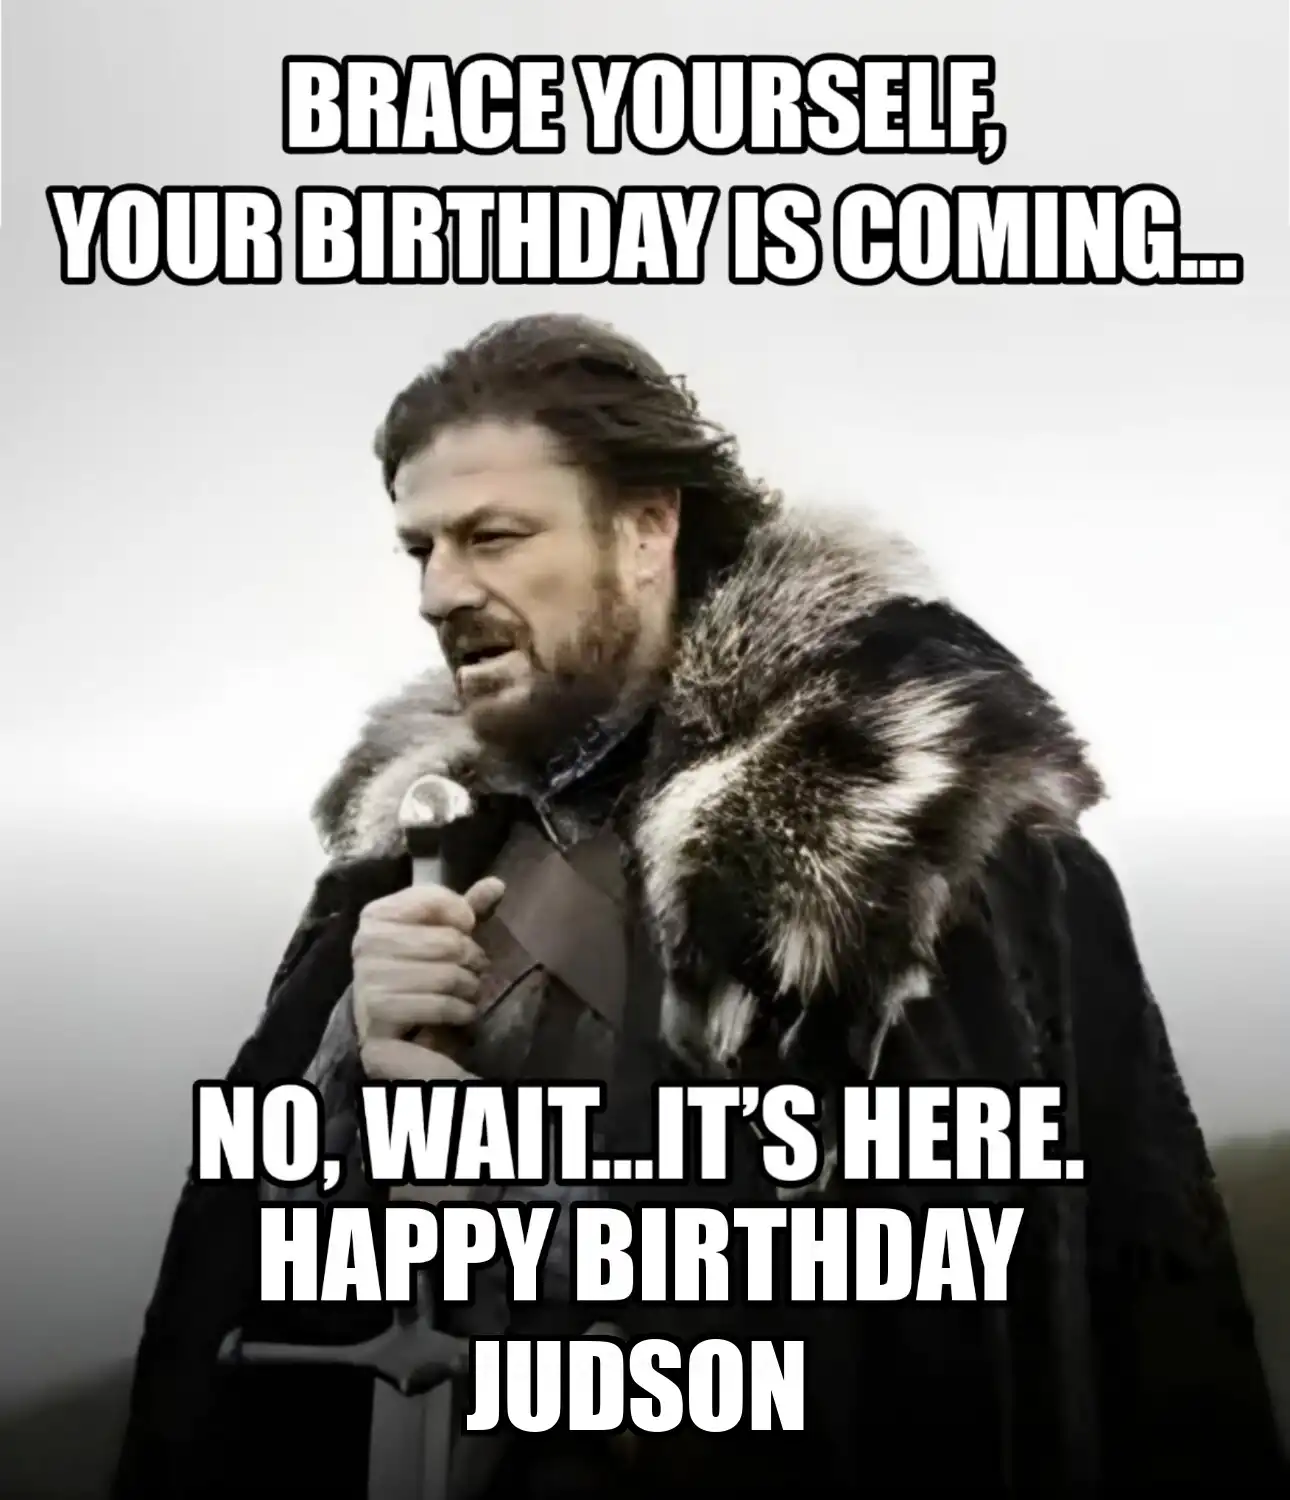 Happy Birthday Judson Brace Yourself Your Birthday Is Coming Meme